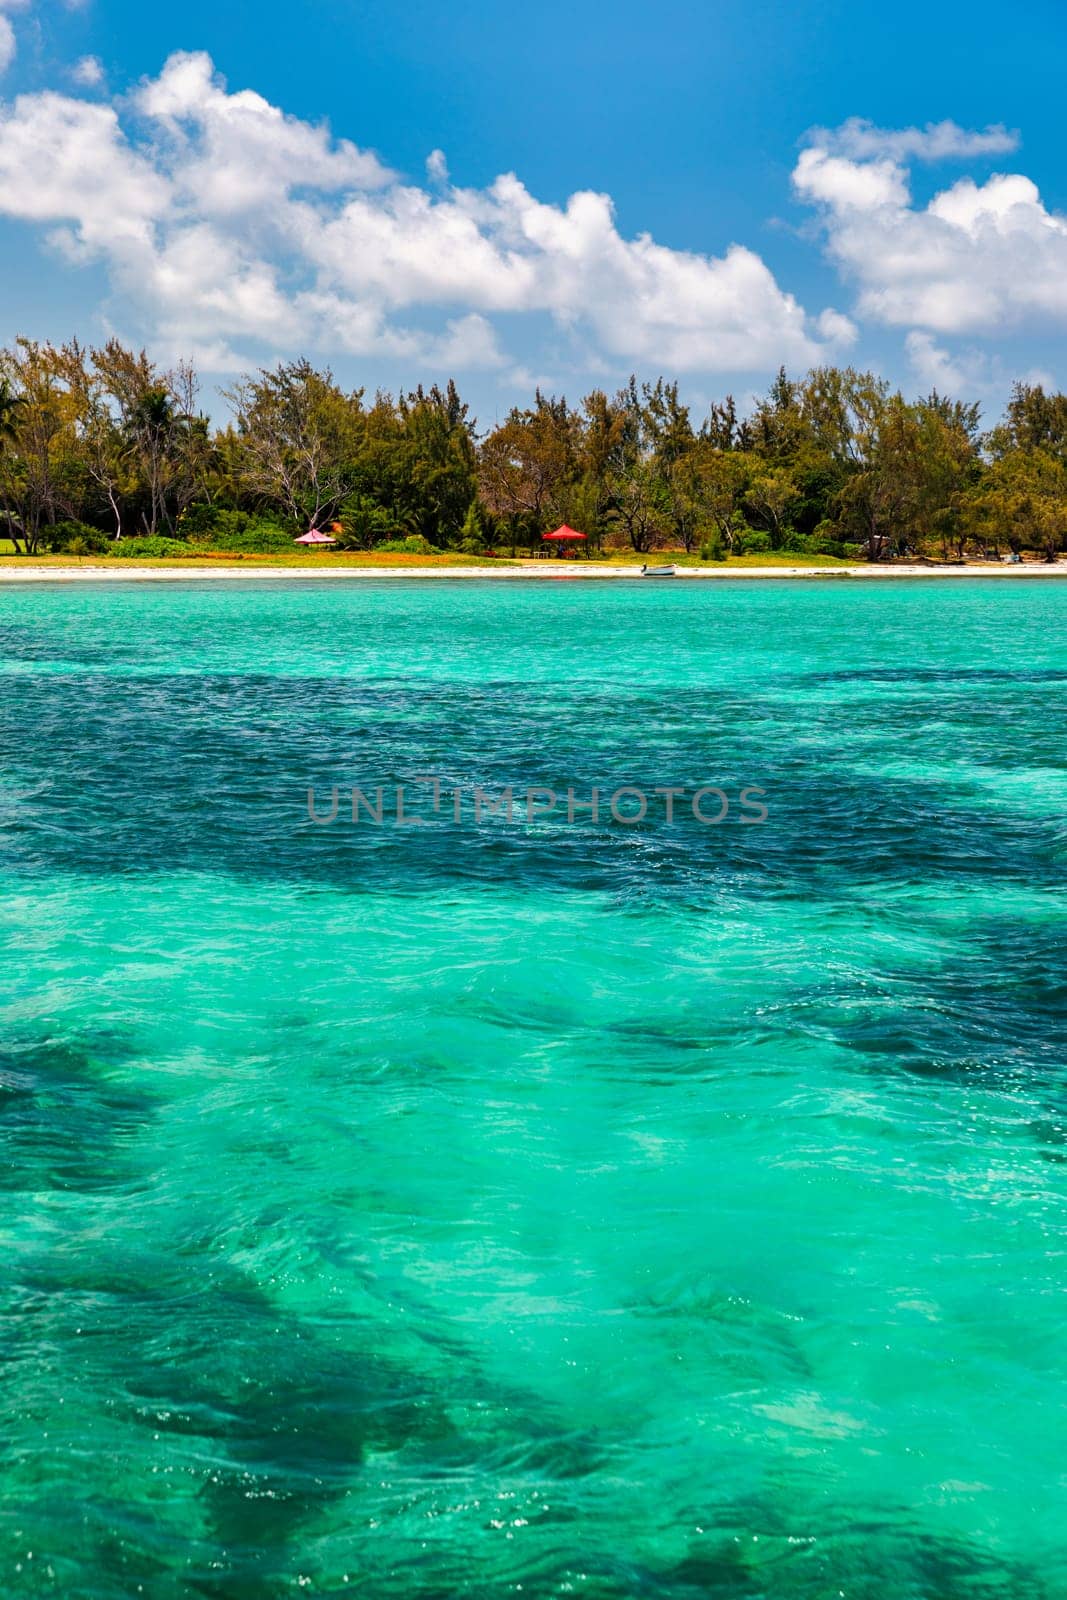 Tropical beach scenery, vacation in paradise island Mauritius. Dream exotic island, tropical paradise. Best beaches of Mauritius island, luxury resorts of Mauritius, Indian Ocean, Africa.